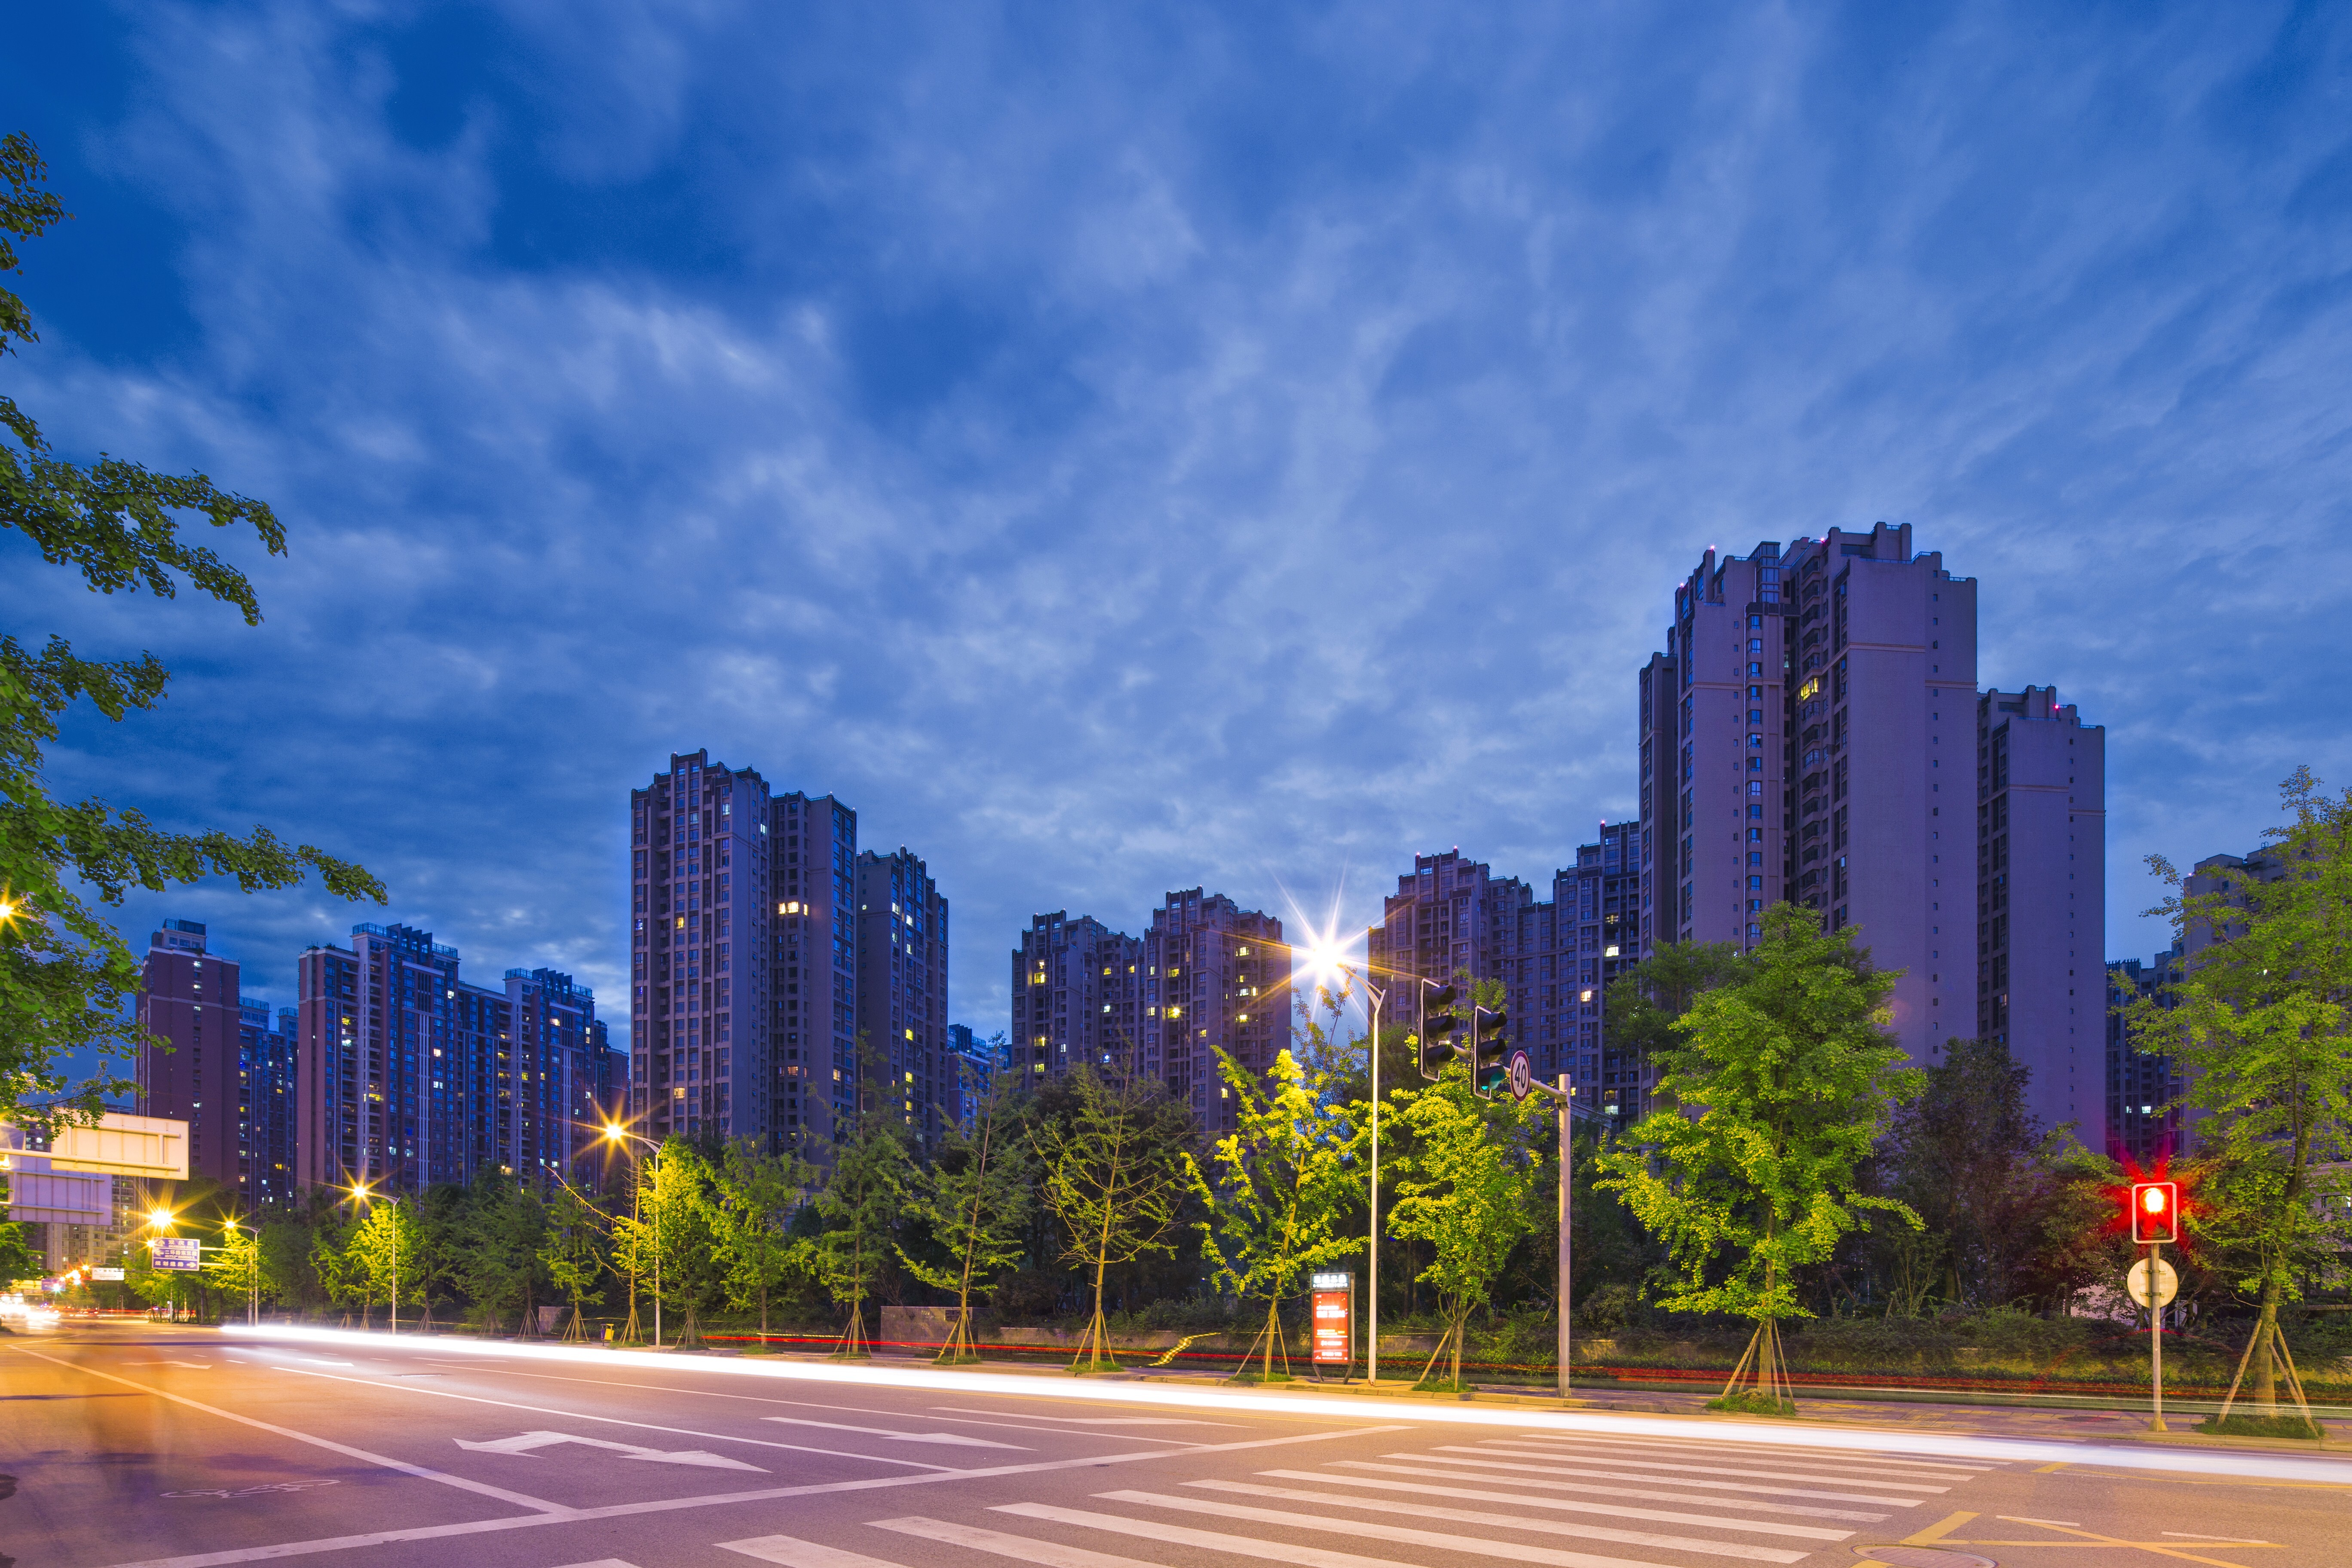 Apartment blocks developed by China Resources Land. Photo: Getty Images/500px Asia